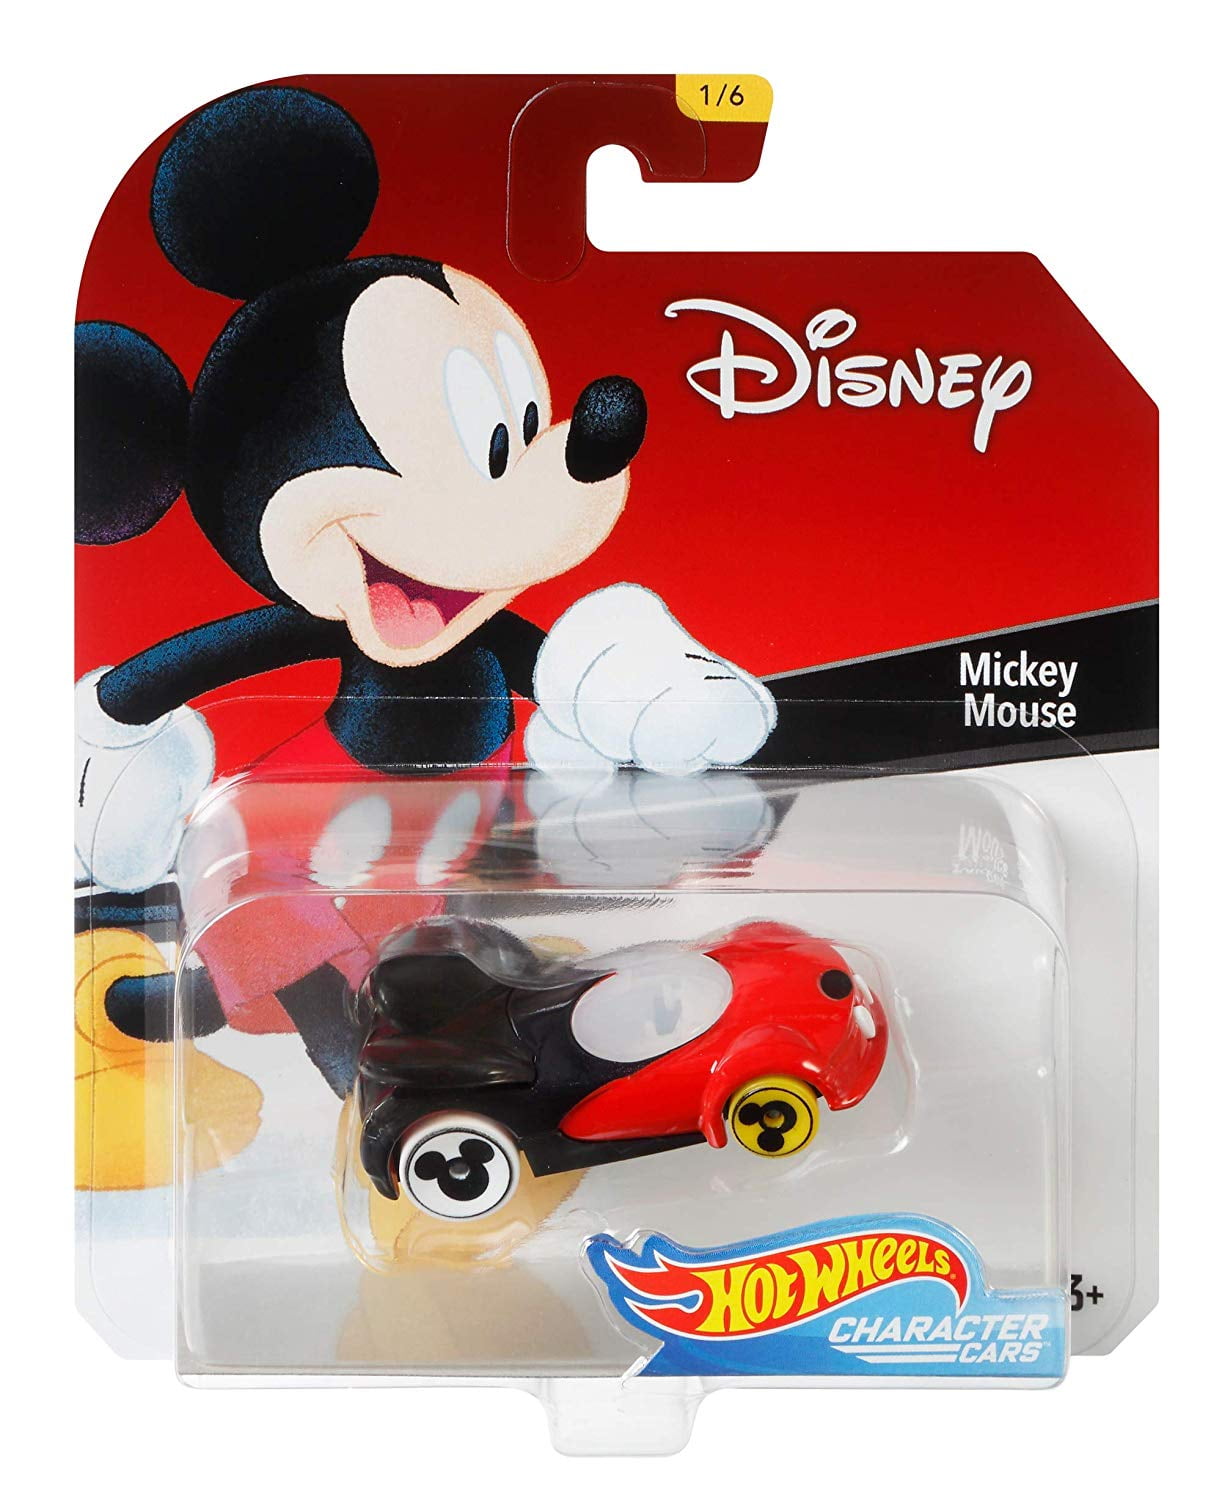 2018 Hot Wheels Disney Character Car Mickey Mouse 1/64 Diecast Model Toy Car